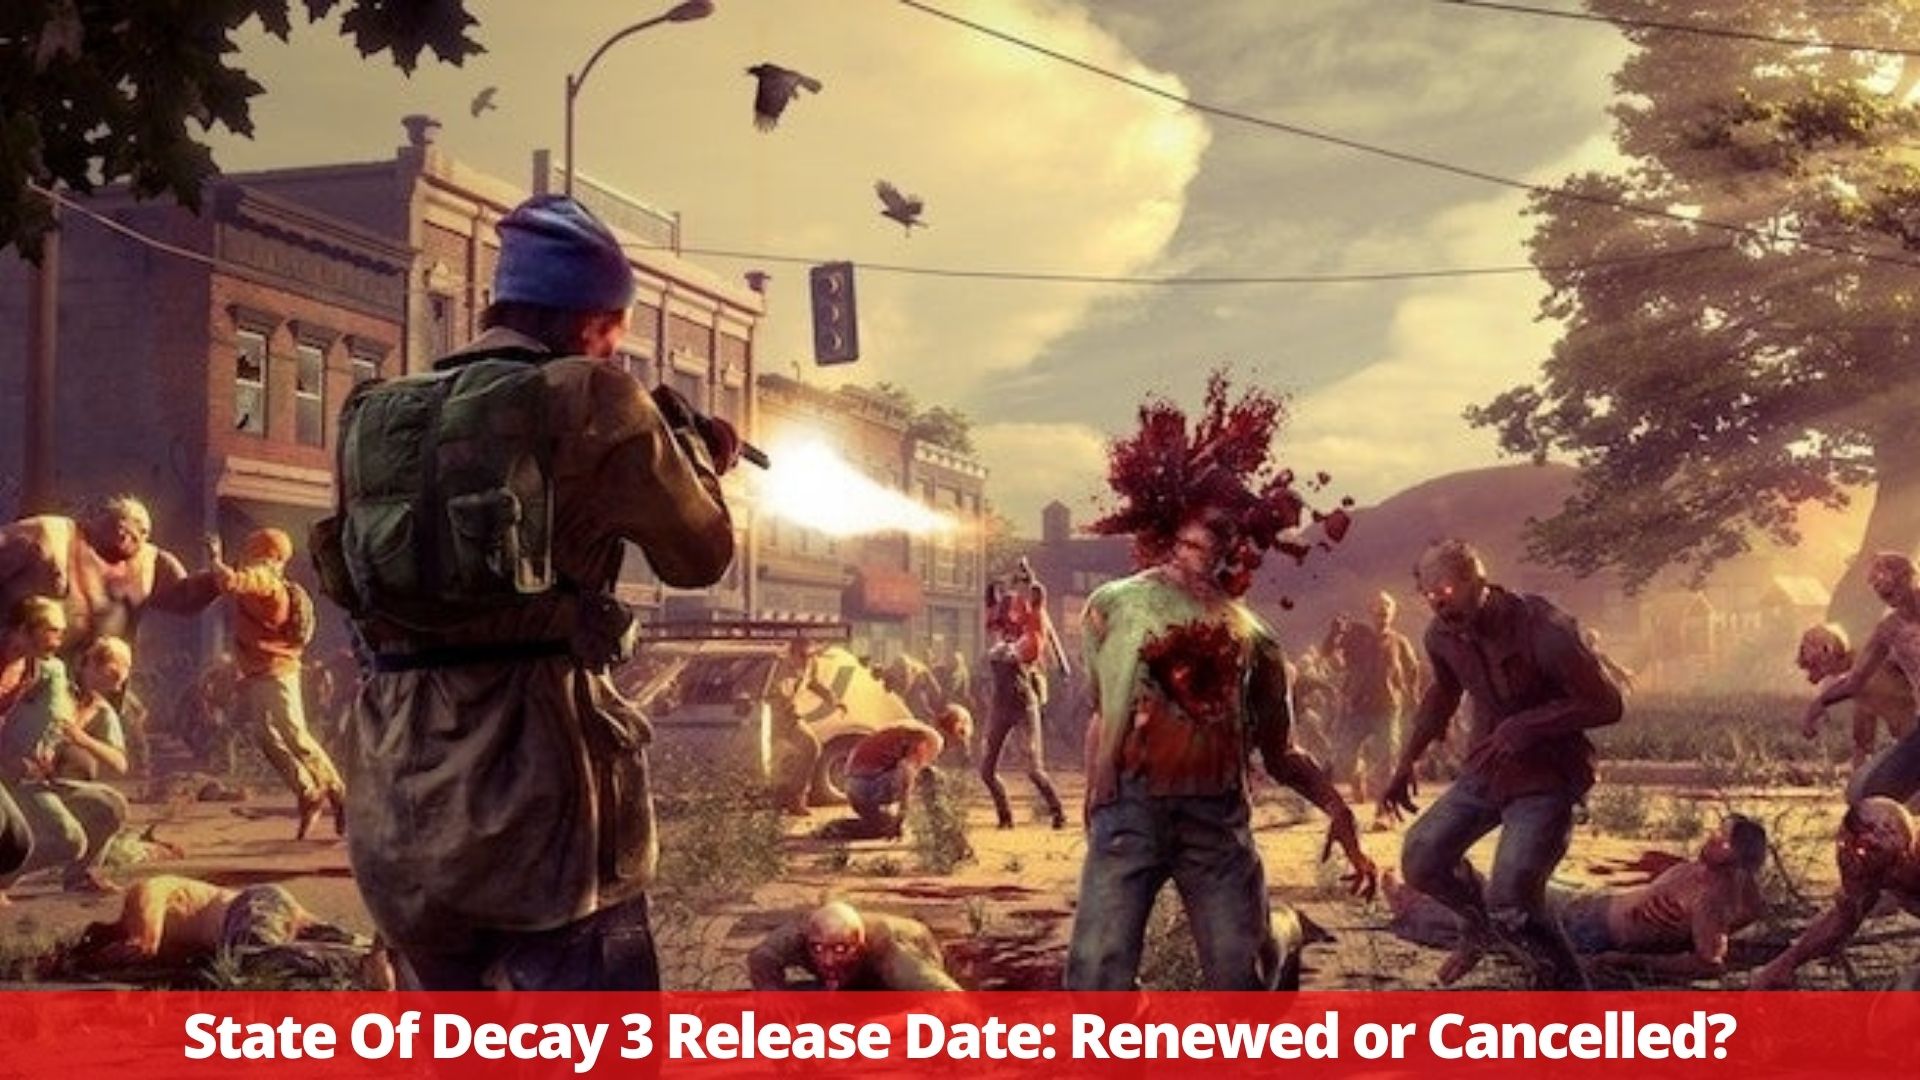 State Of Decay 3 Release Date: Renewed or Cancelled?